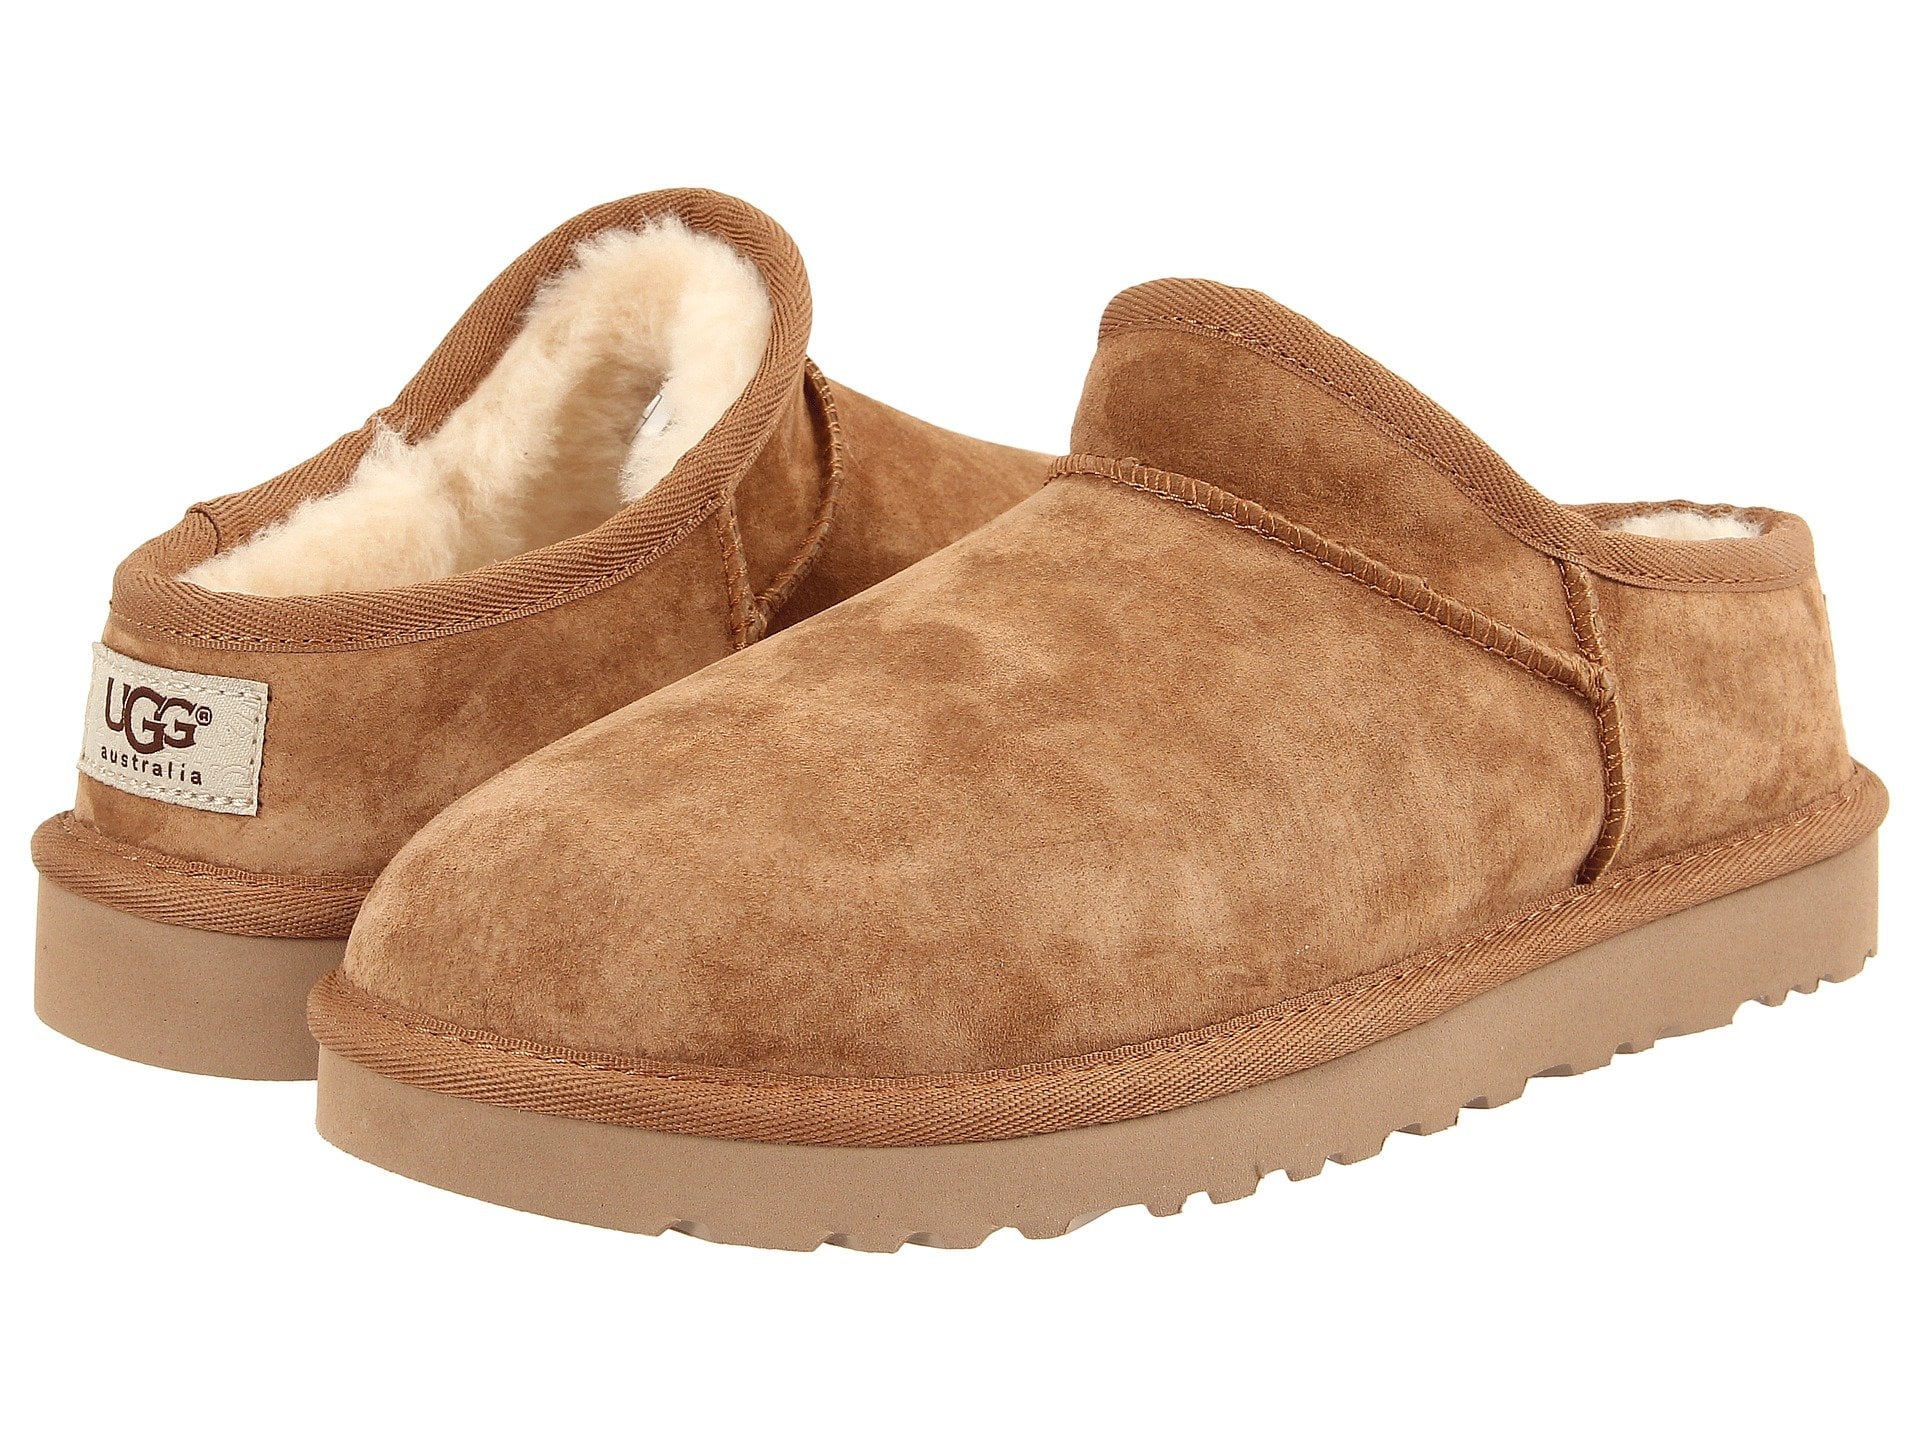 ugg house slippers on sale